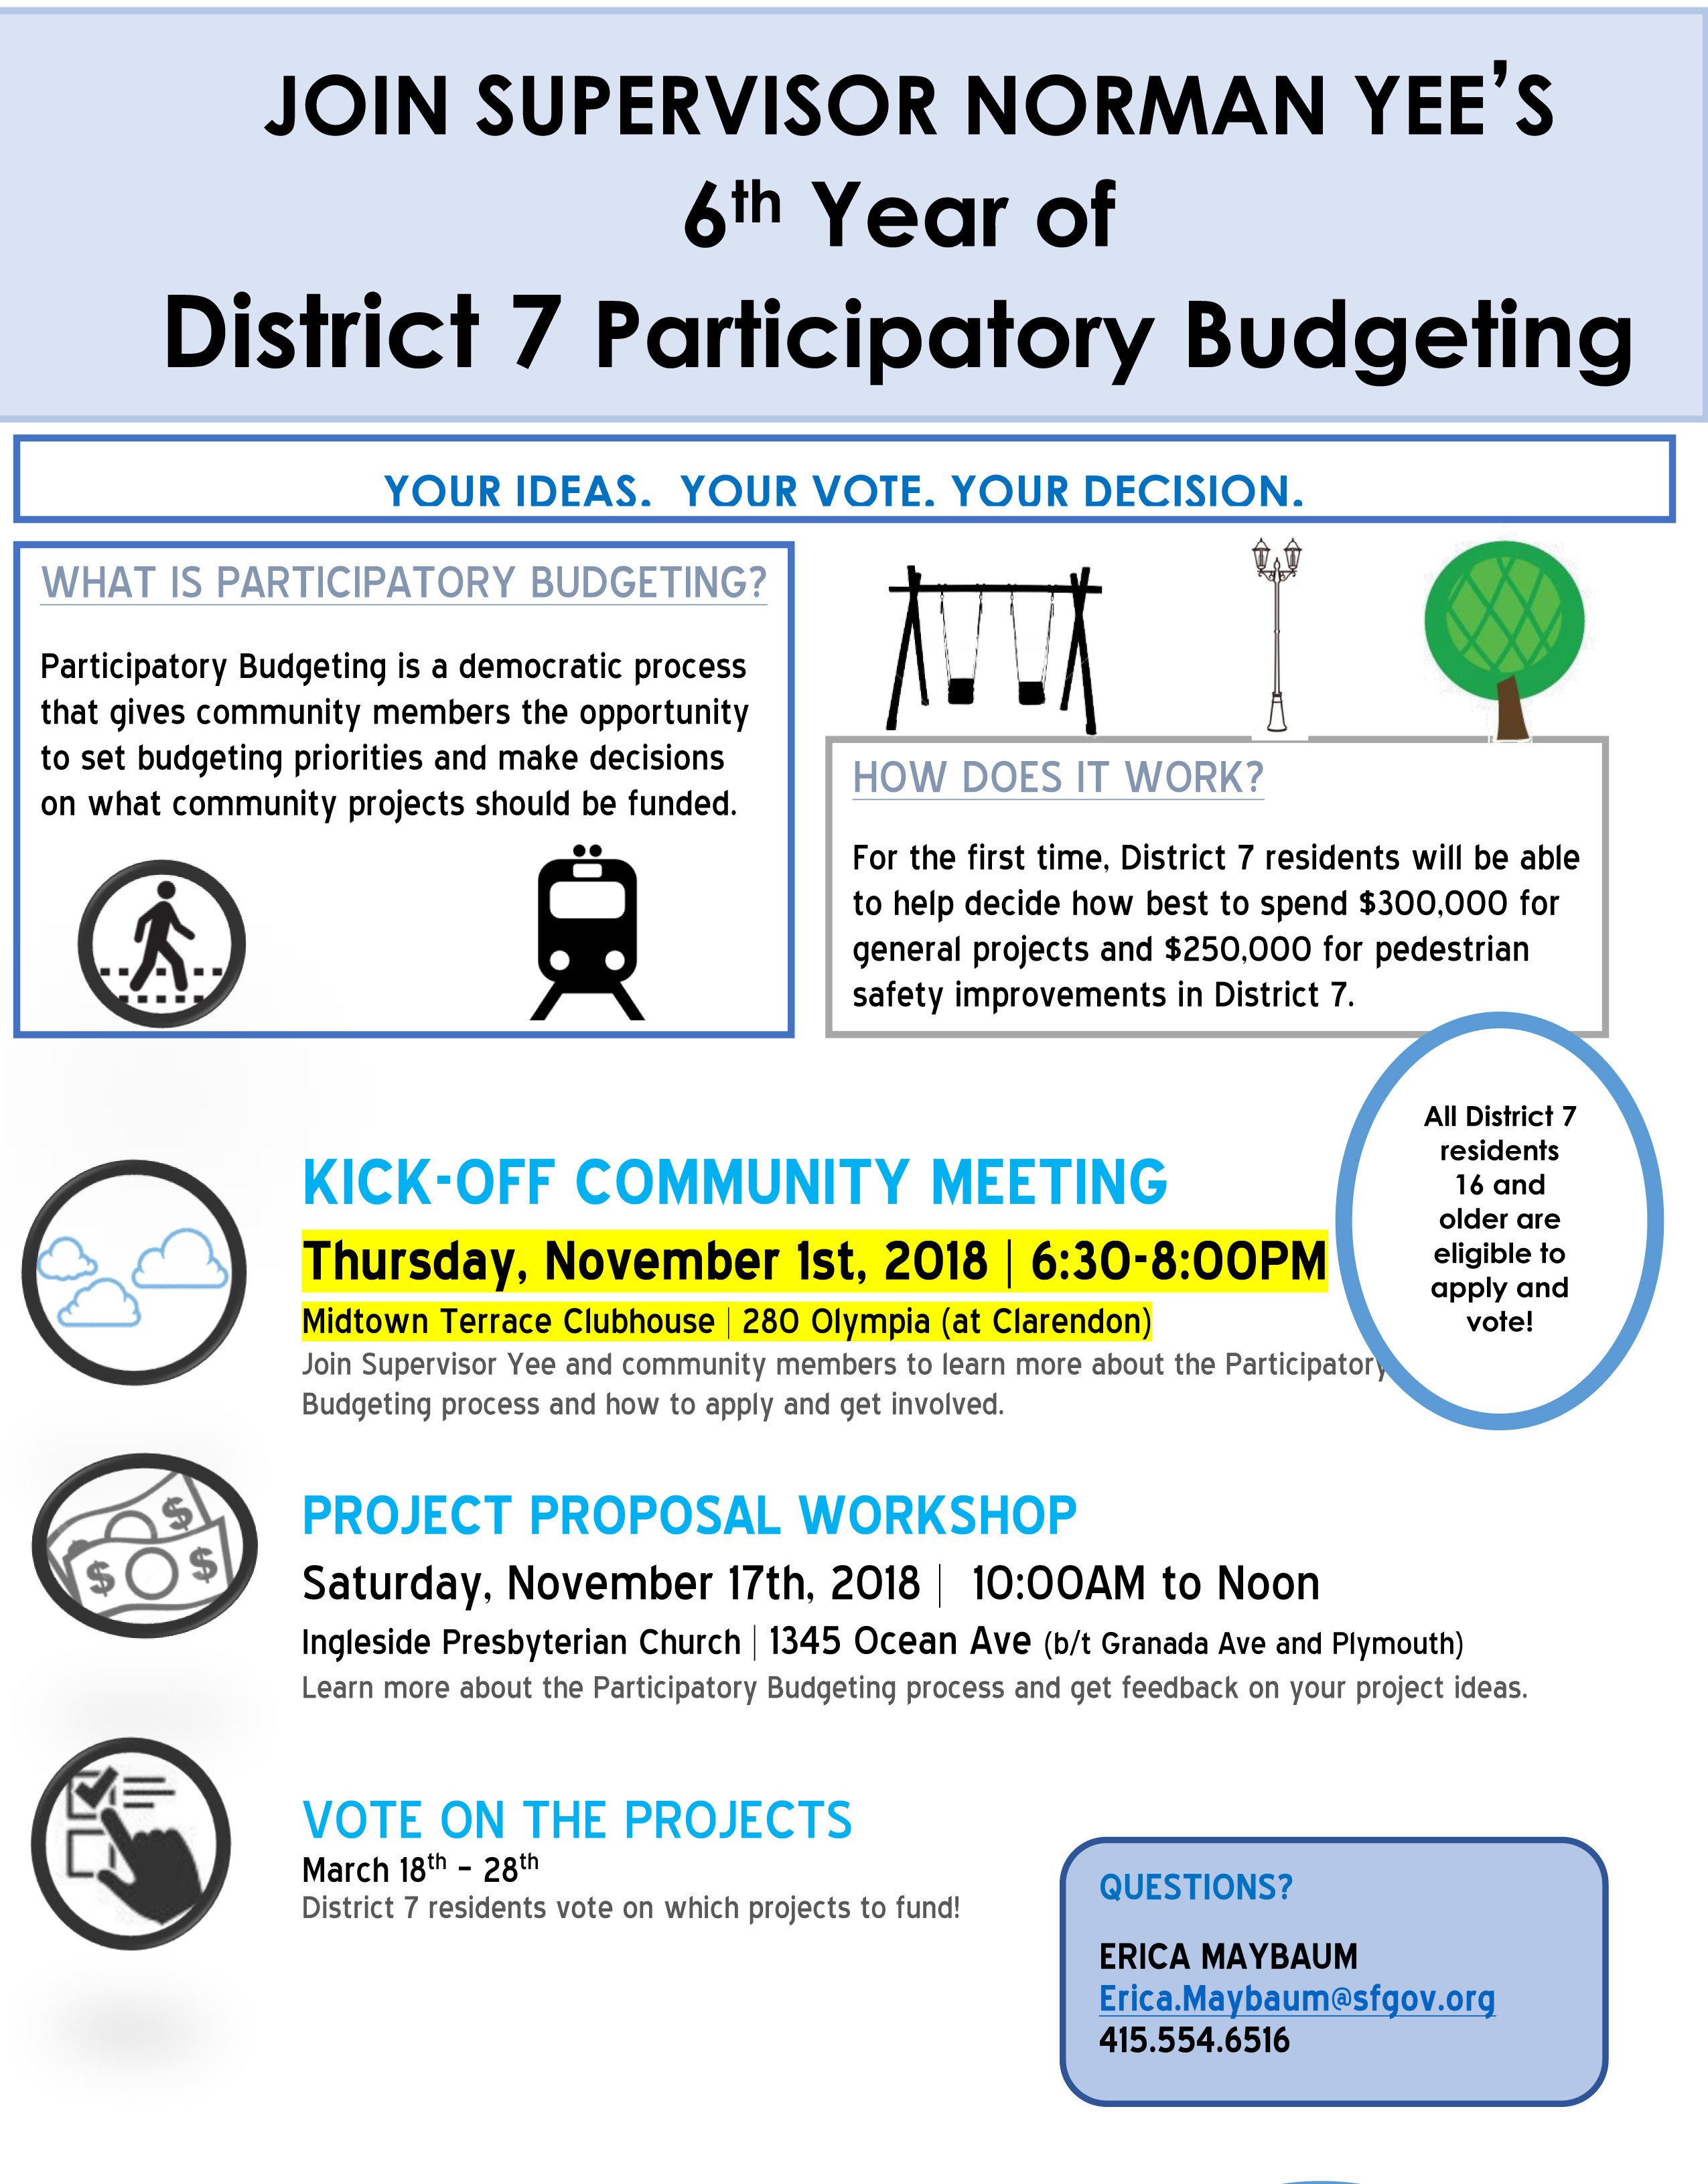 2018-2019 Particapatory Budgeting Community Kick-off_2018_11_01.jpg